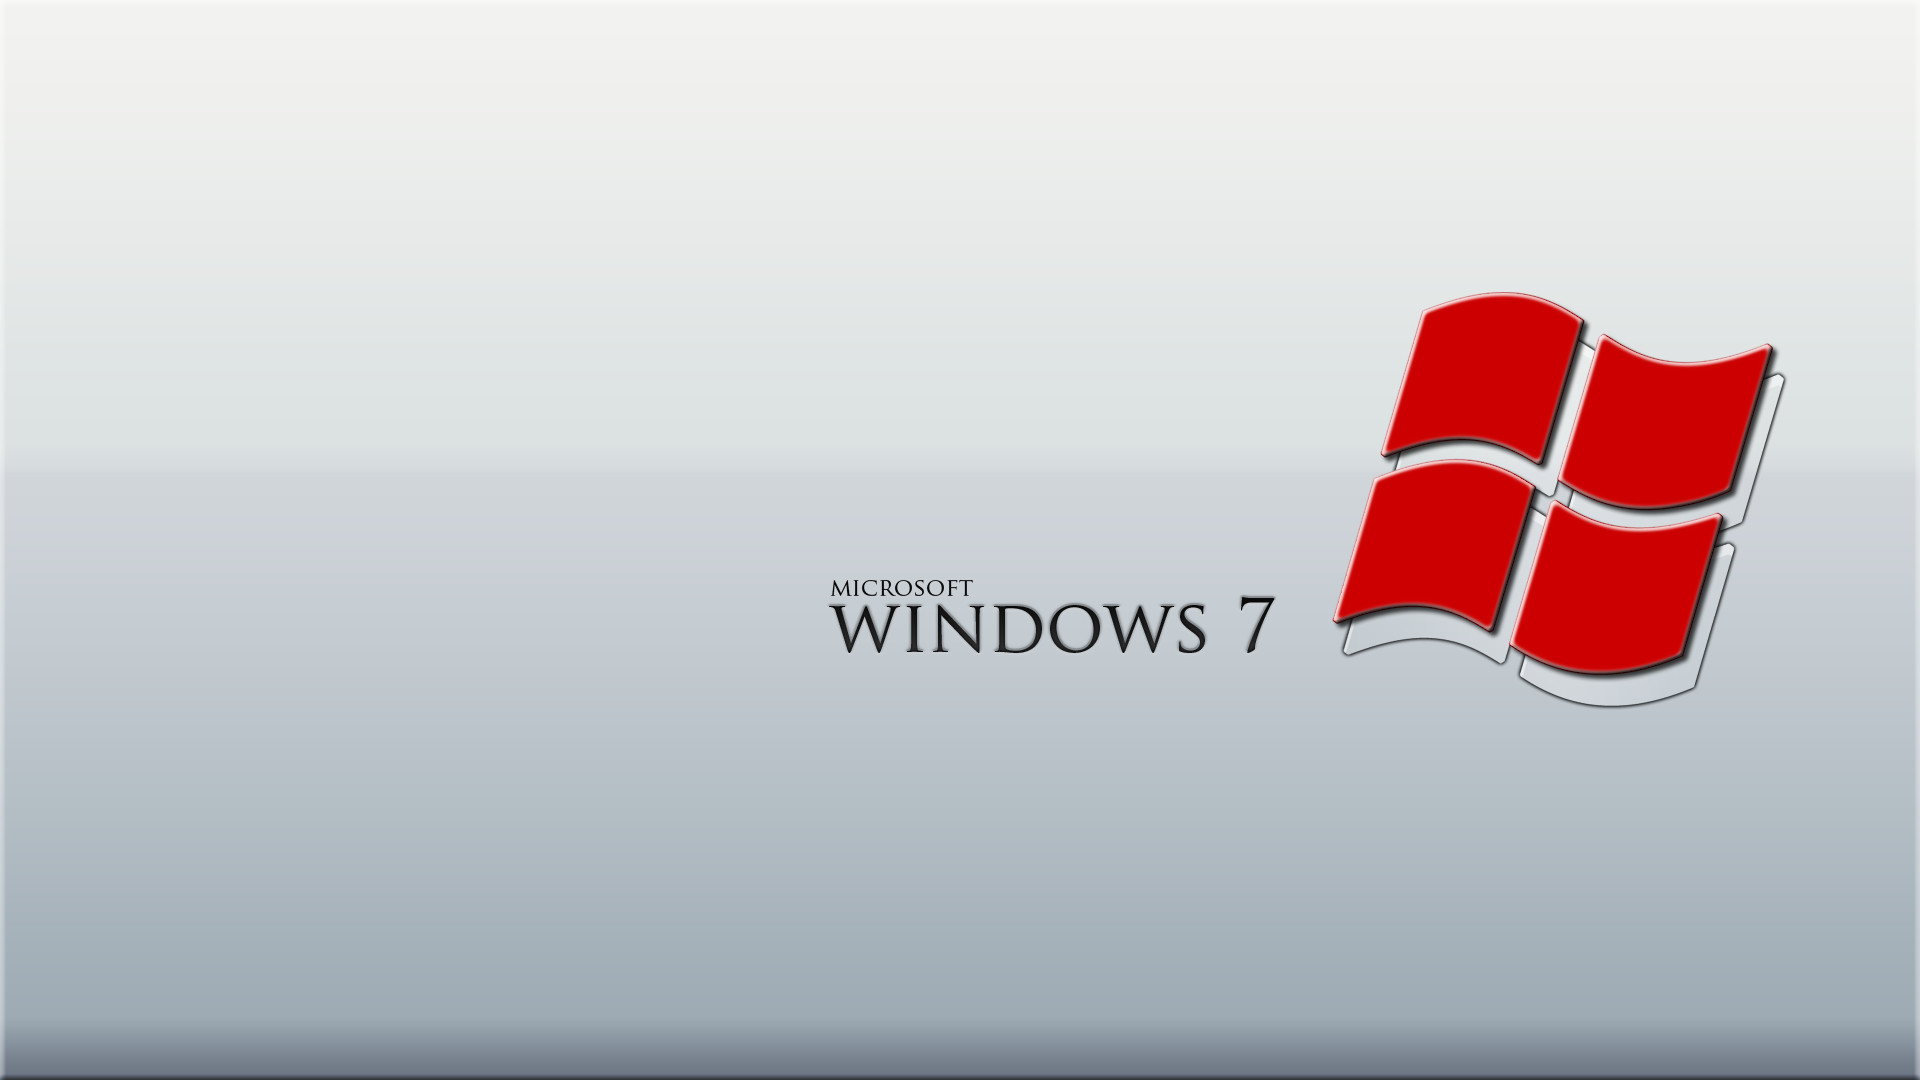 windows 7 wall red by coolcat21 on DeviantArt